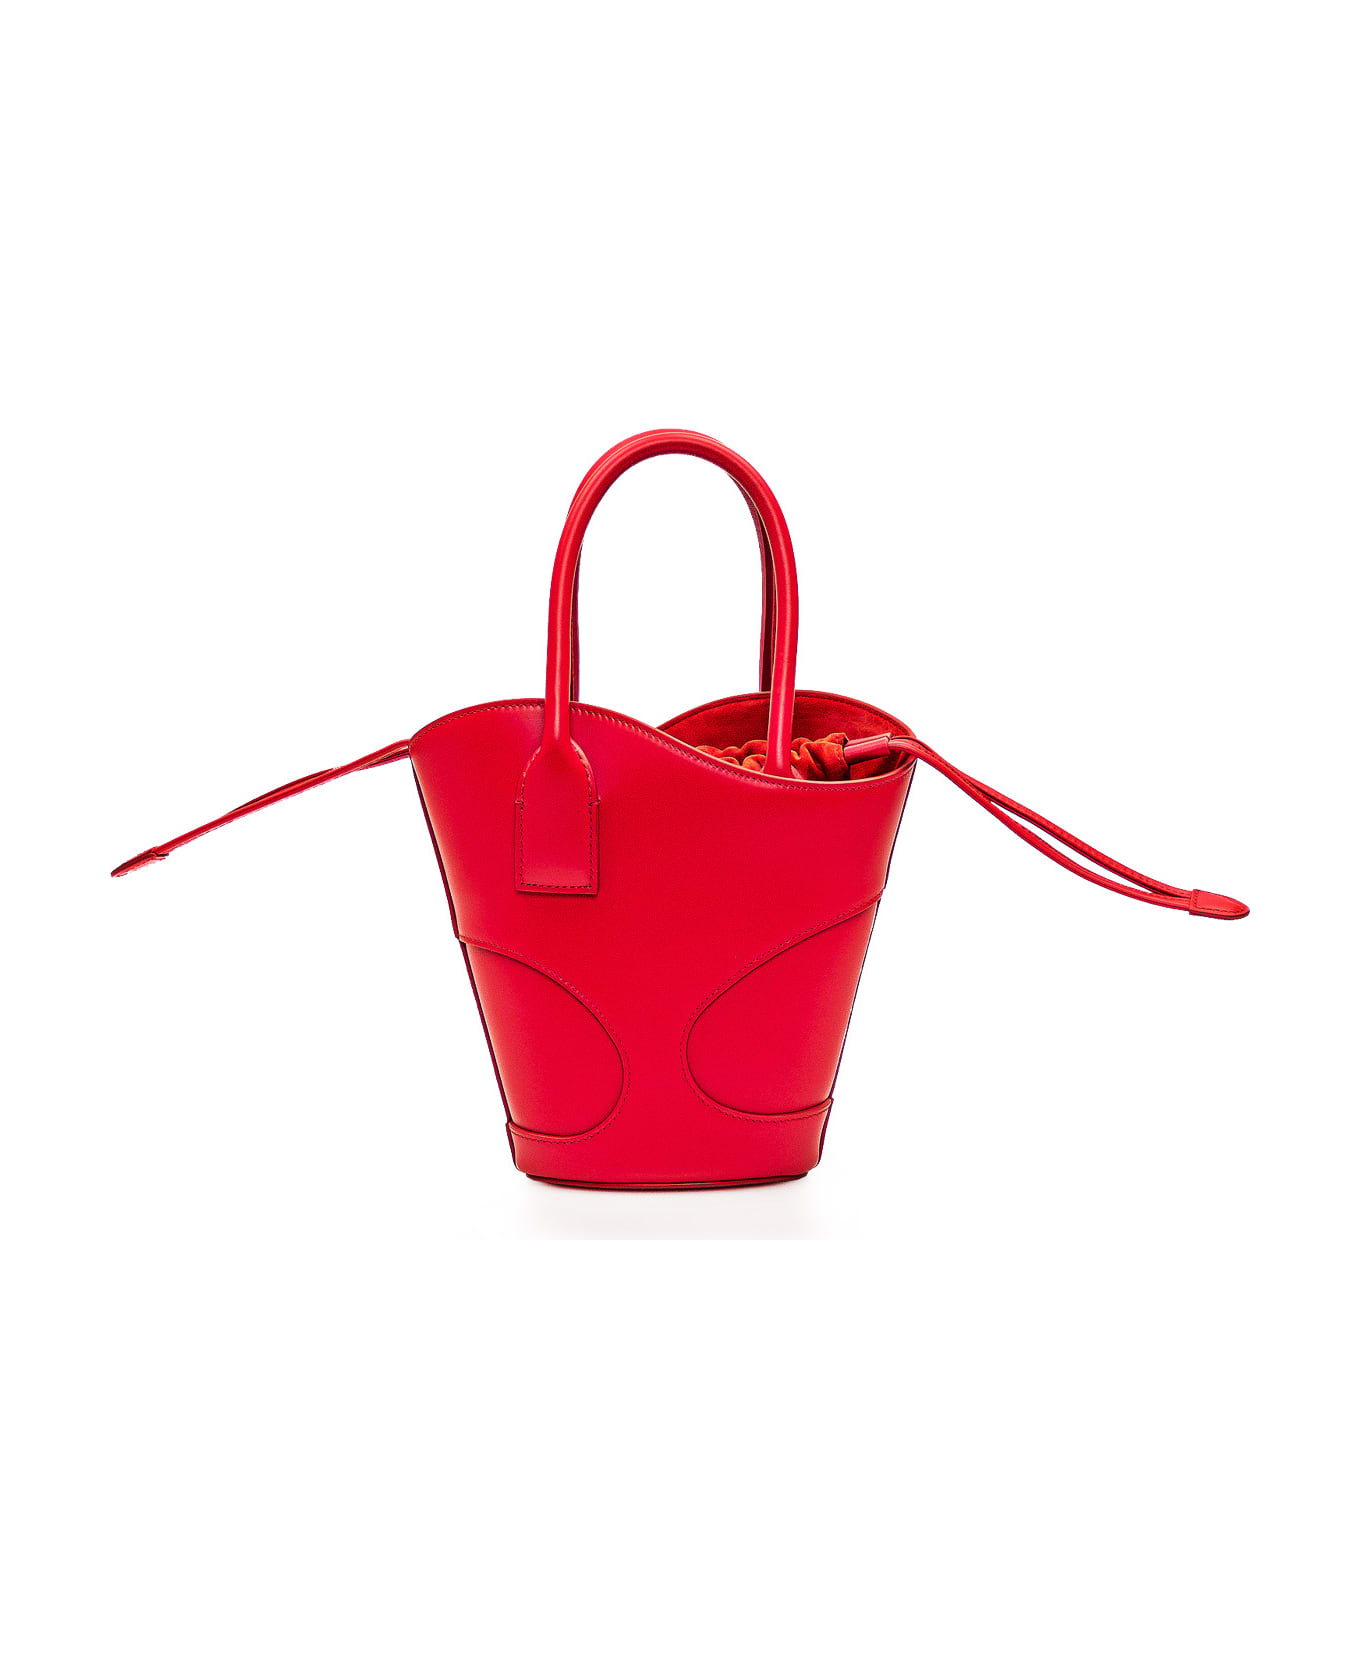 Ferragamo Tote Bag With Cut Out (s) - FLAME RED